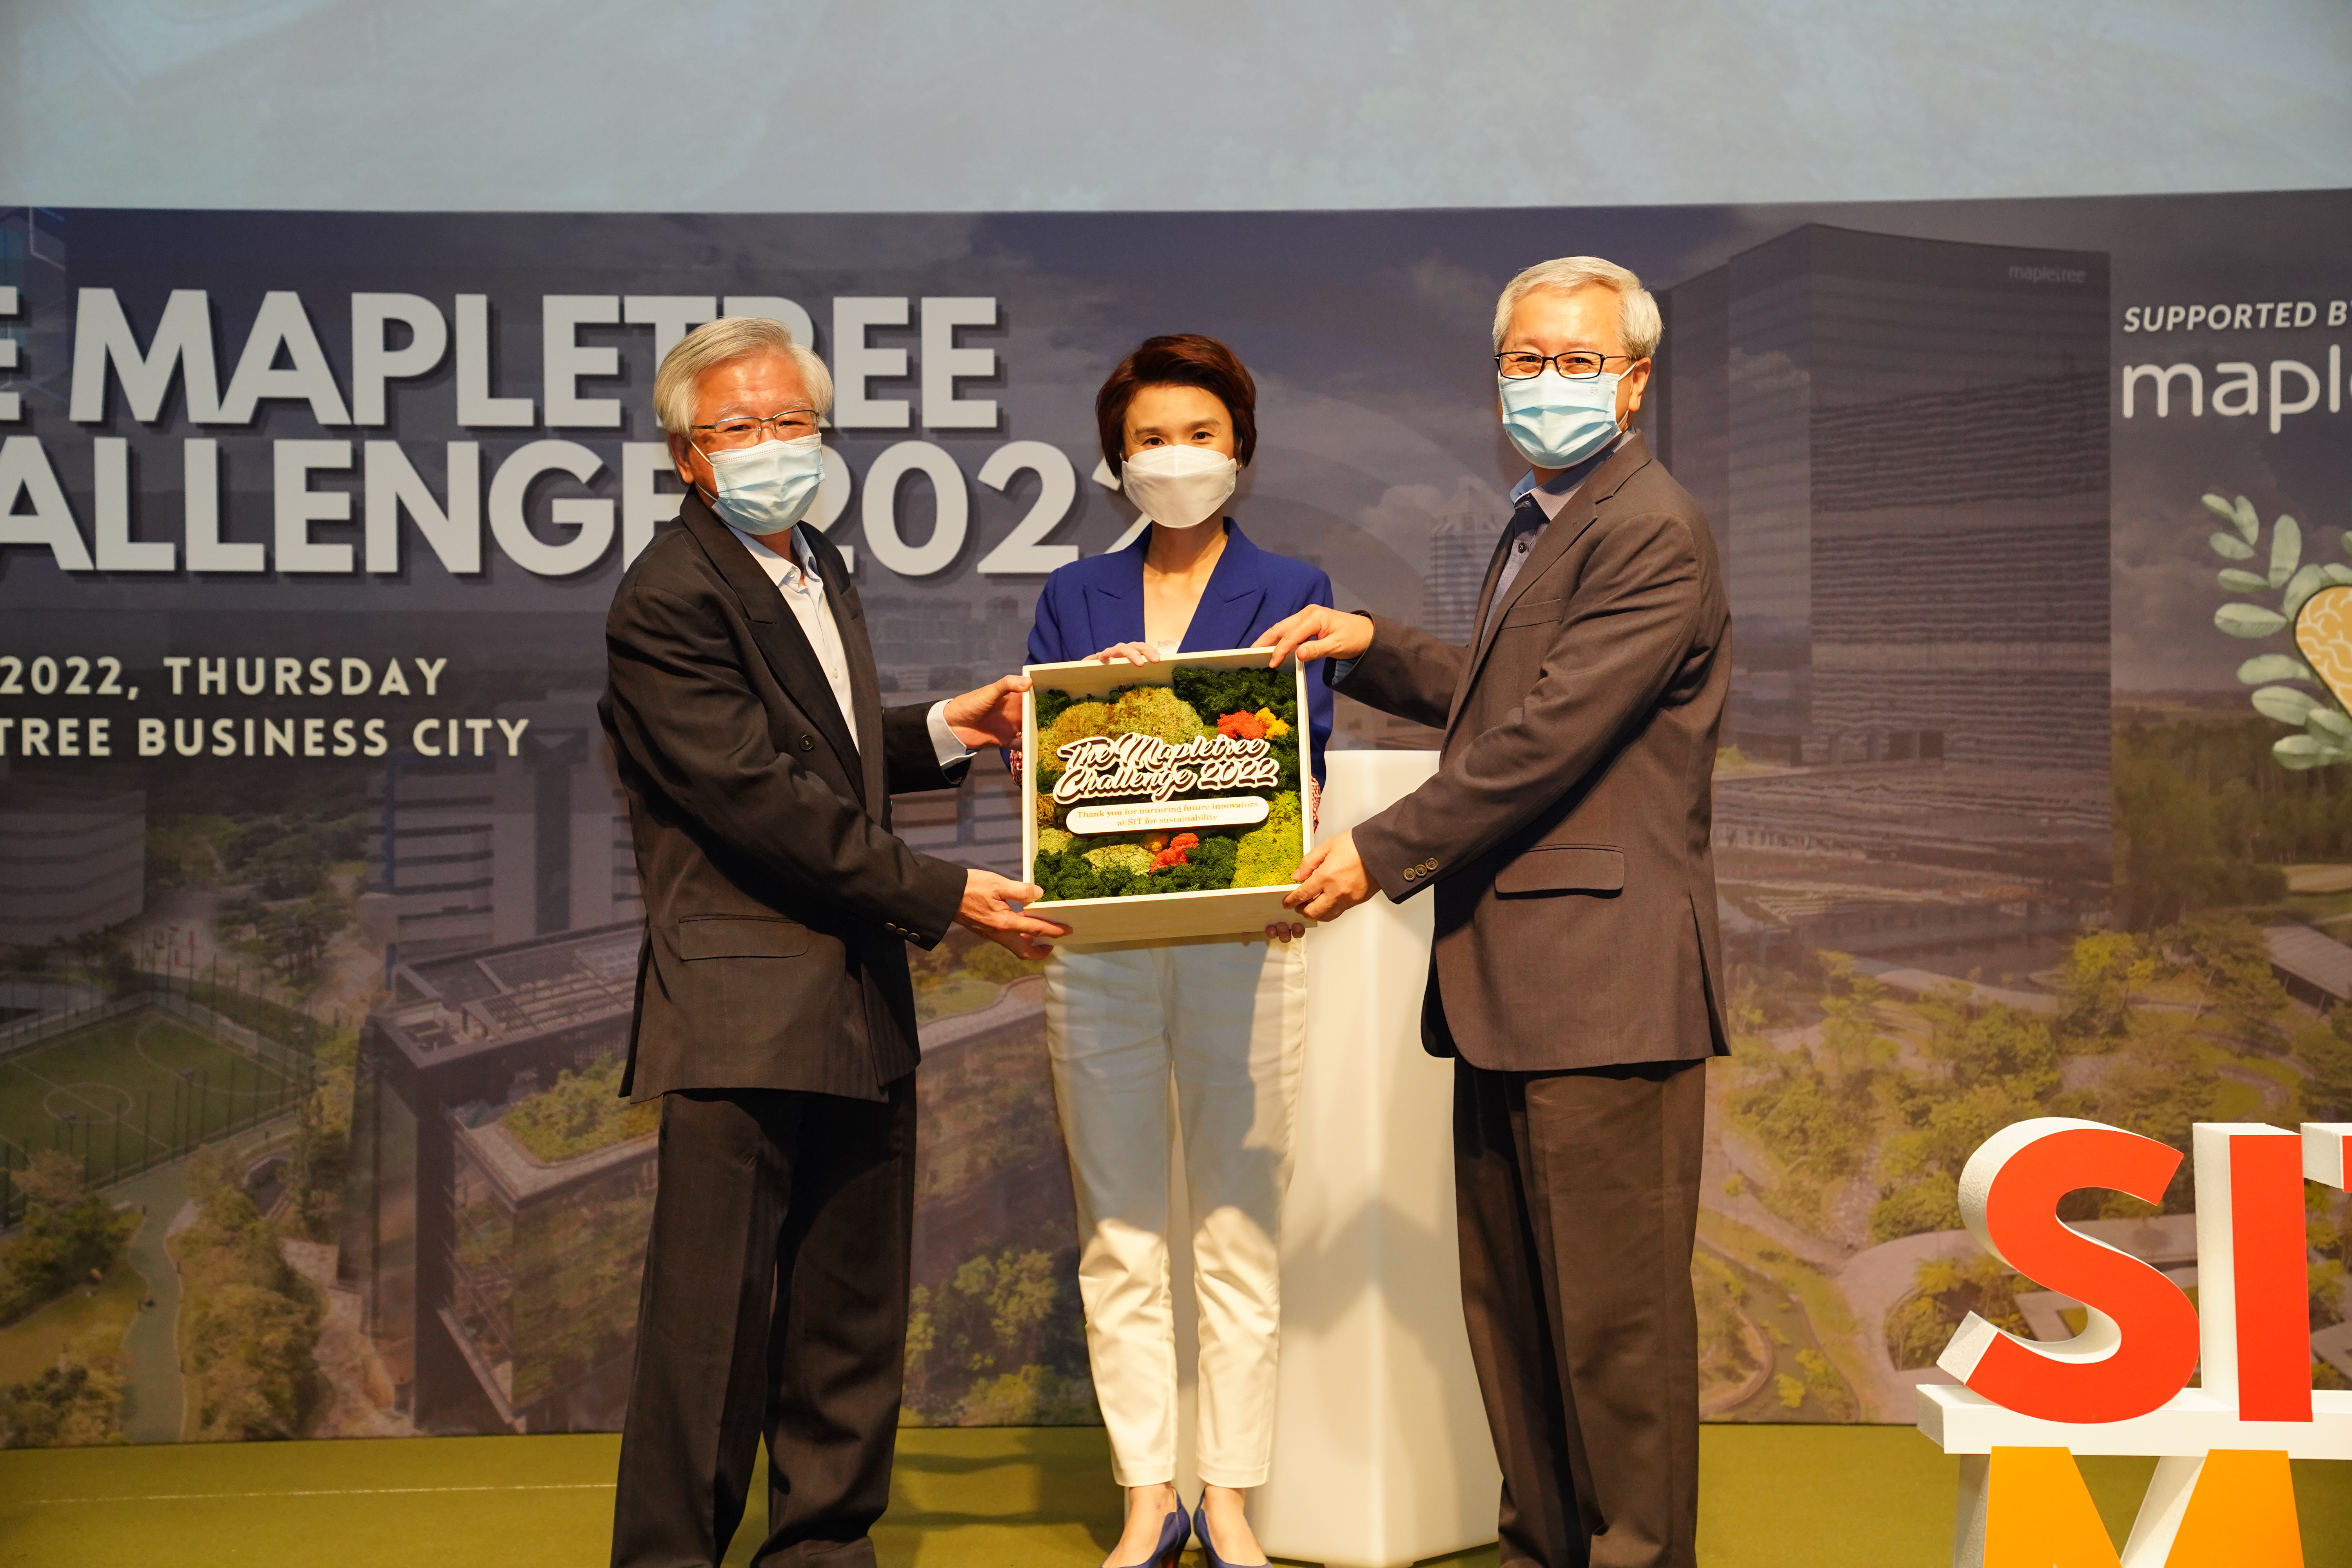 Exchange of token of appreciation Mr Chua Tiow Chye, Deputy Group CEO, Mapletree and Prof Kee Chaing, President, SIT